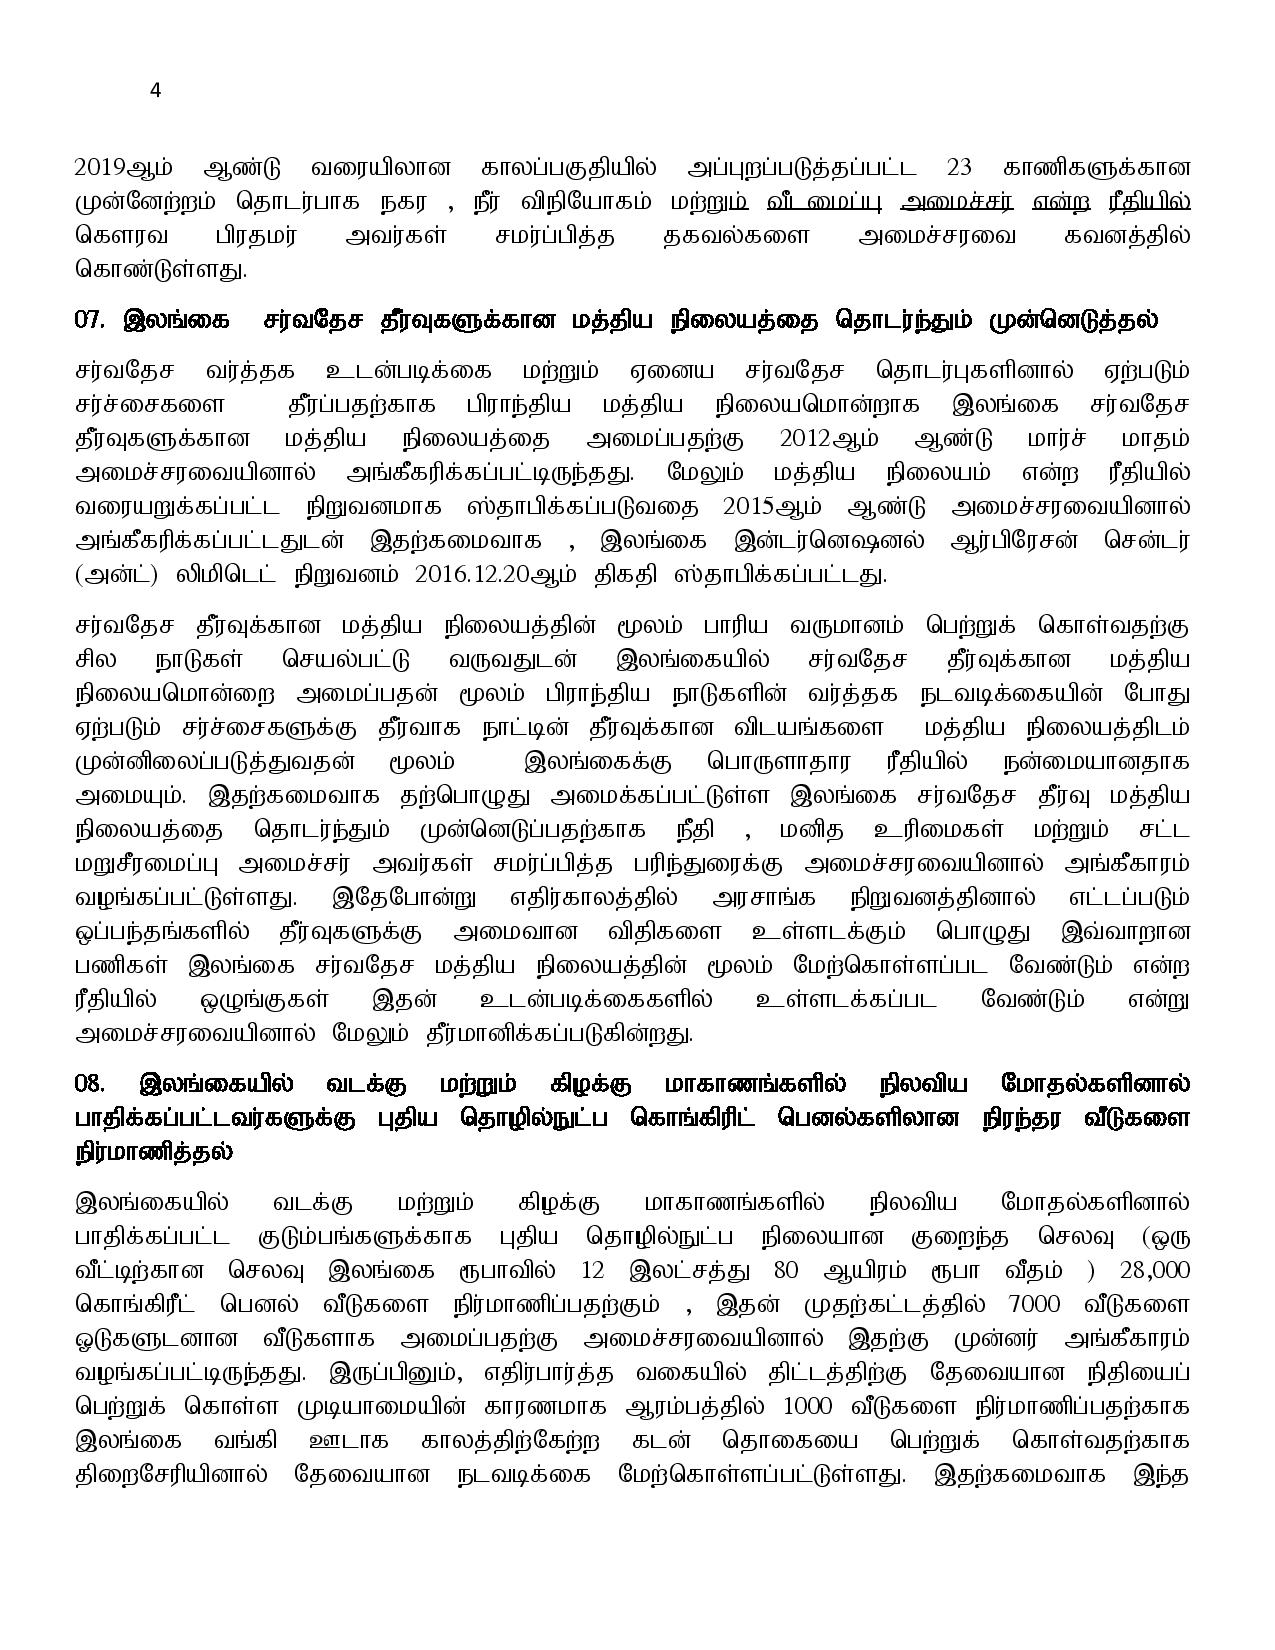 04.03.2020 cabinet Tamil page 004